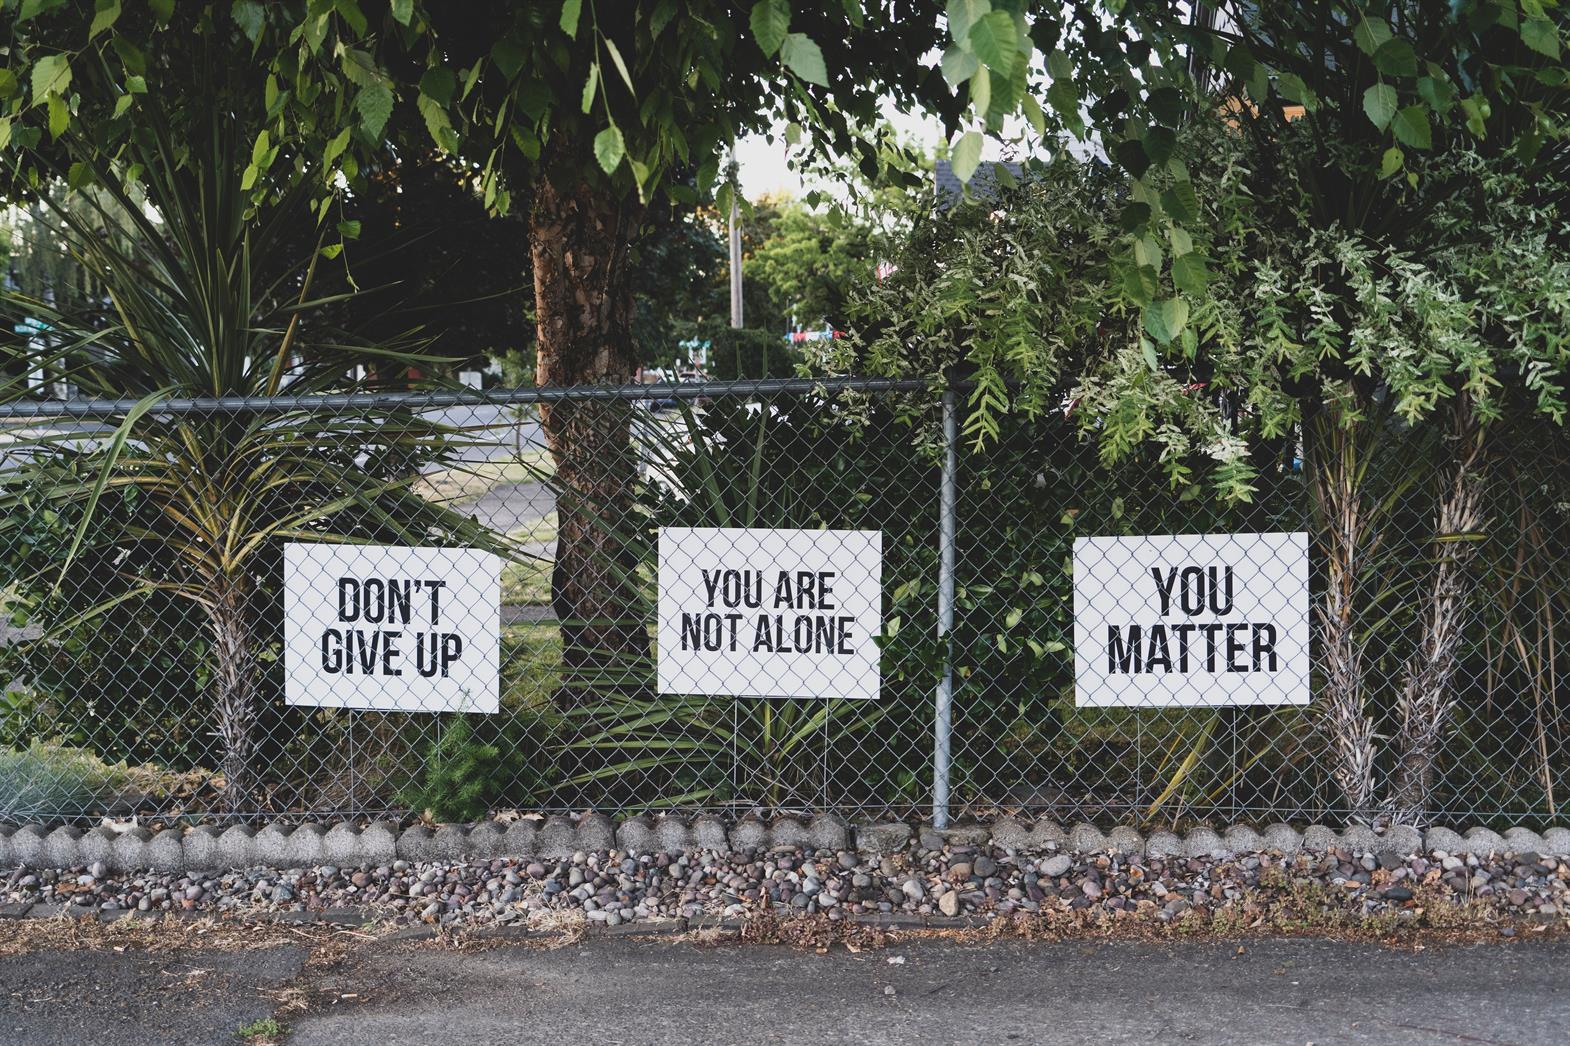 Signs on a fence that read: don't give up, you are not alone, you matter